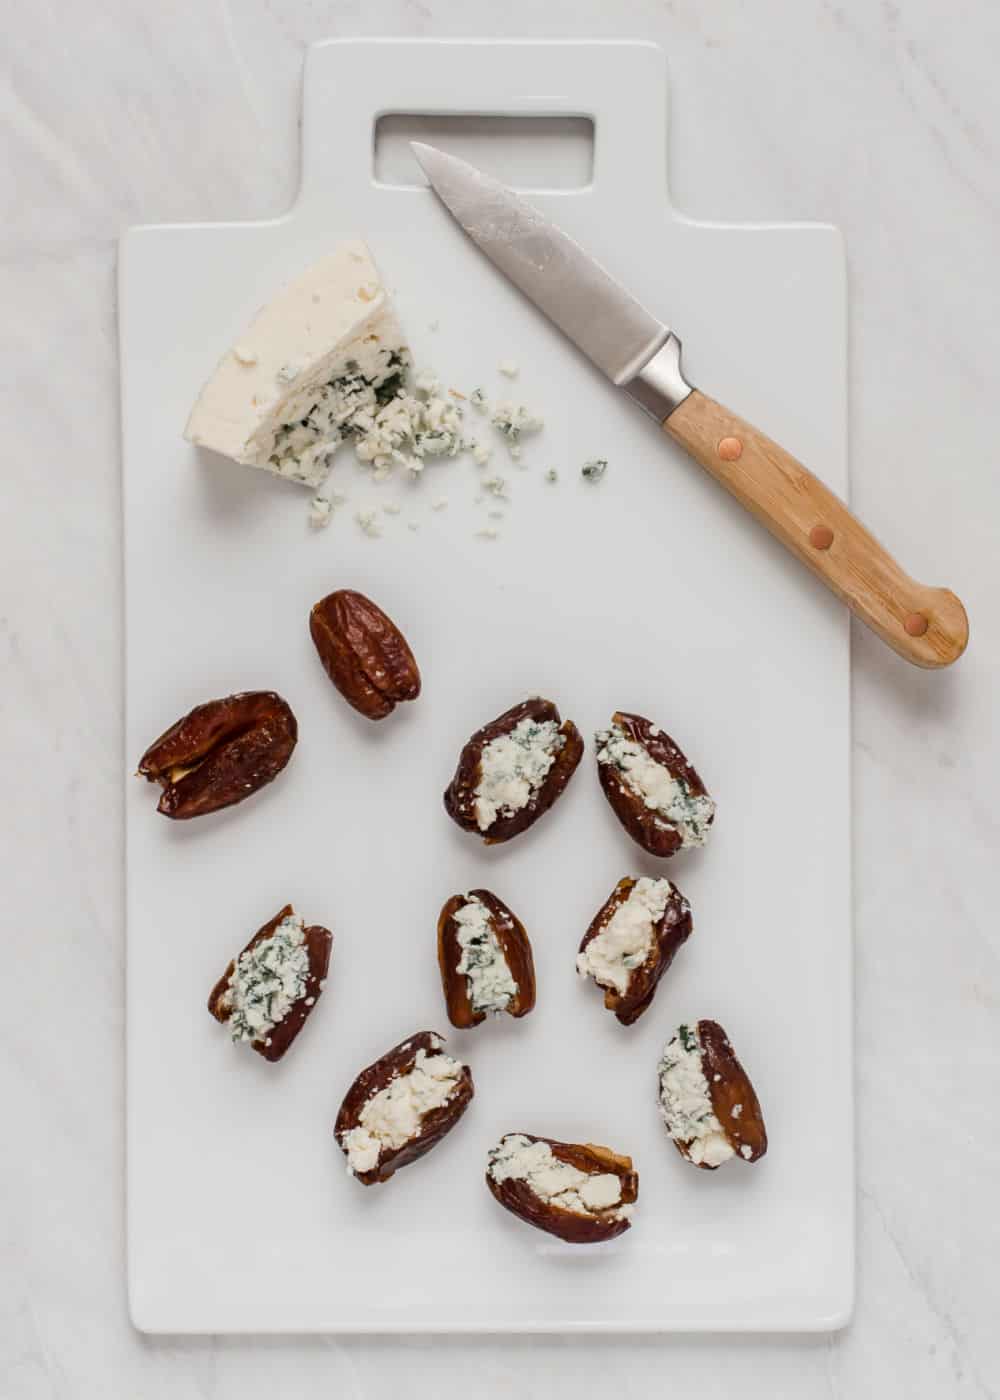 dates cut in half, filled with blue cheese, on white cutting board with knife.